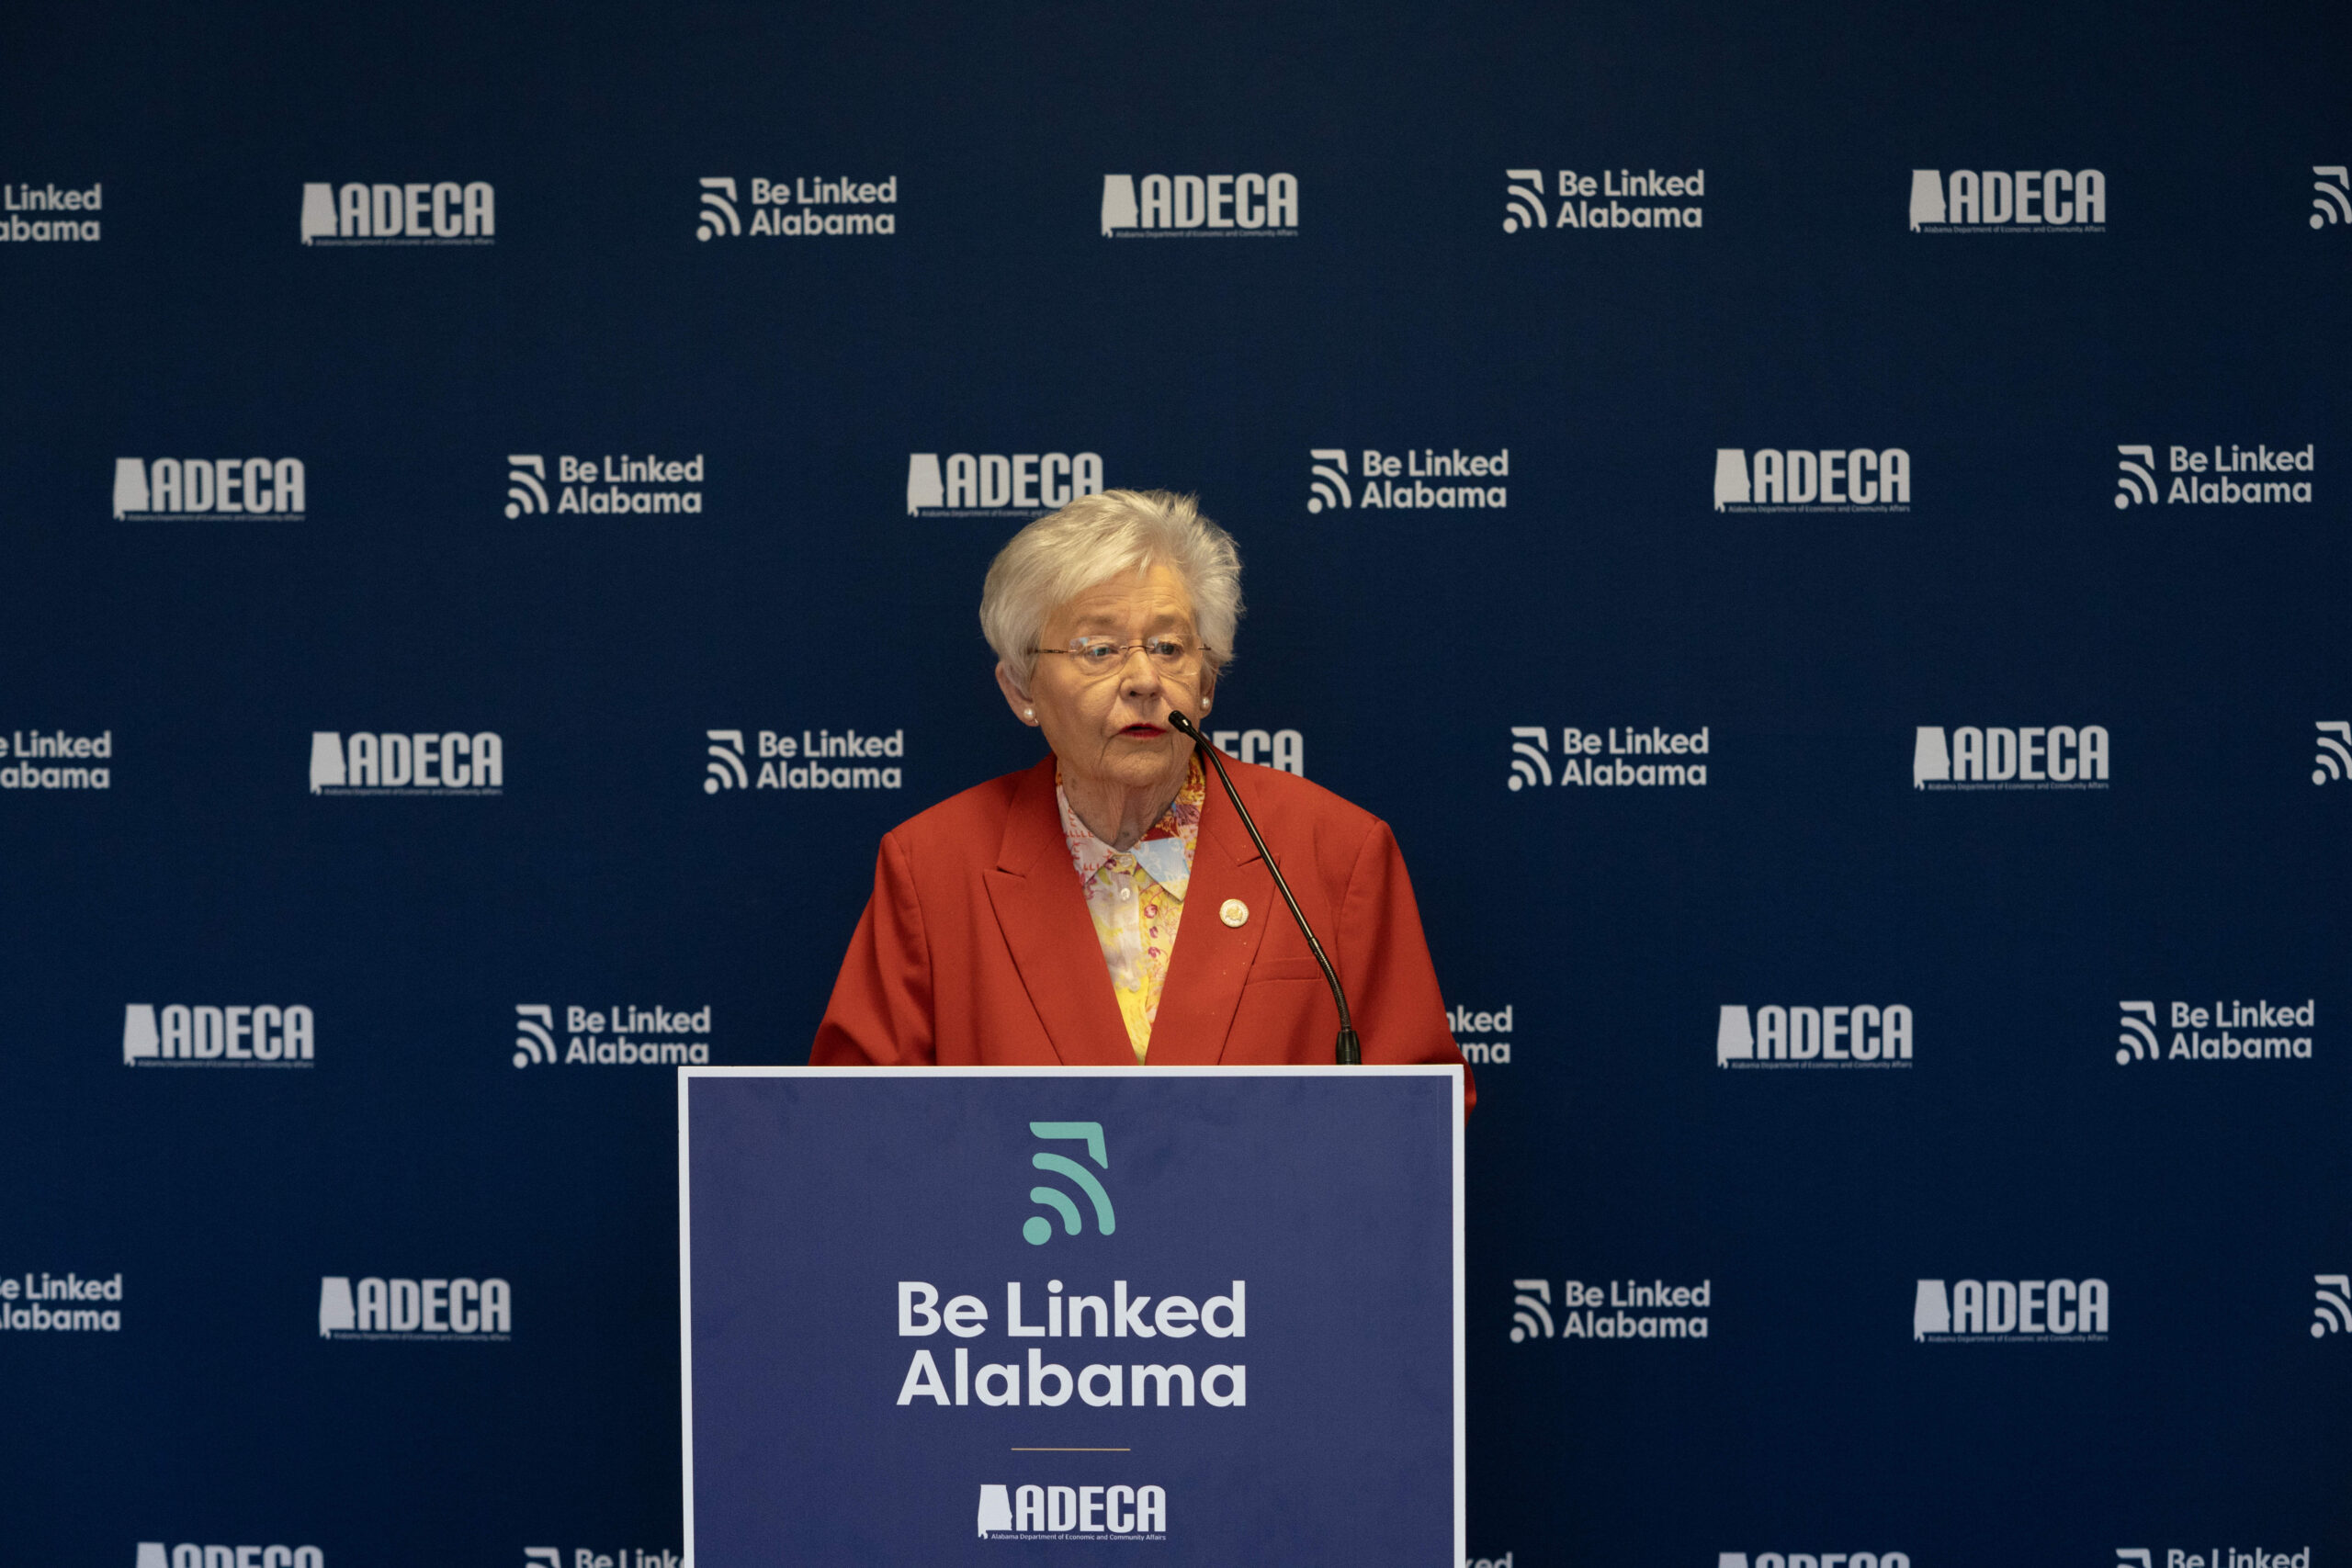 Governor Ivey Holds Fifth Stop on Statewide Broadband Tour to Discuss High-Speed Internet Expansion in DeKalb, Jackson Counties